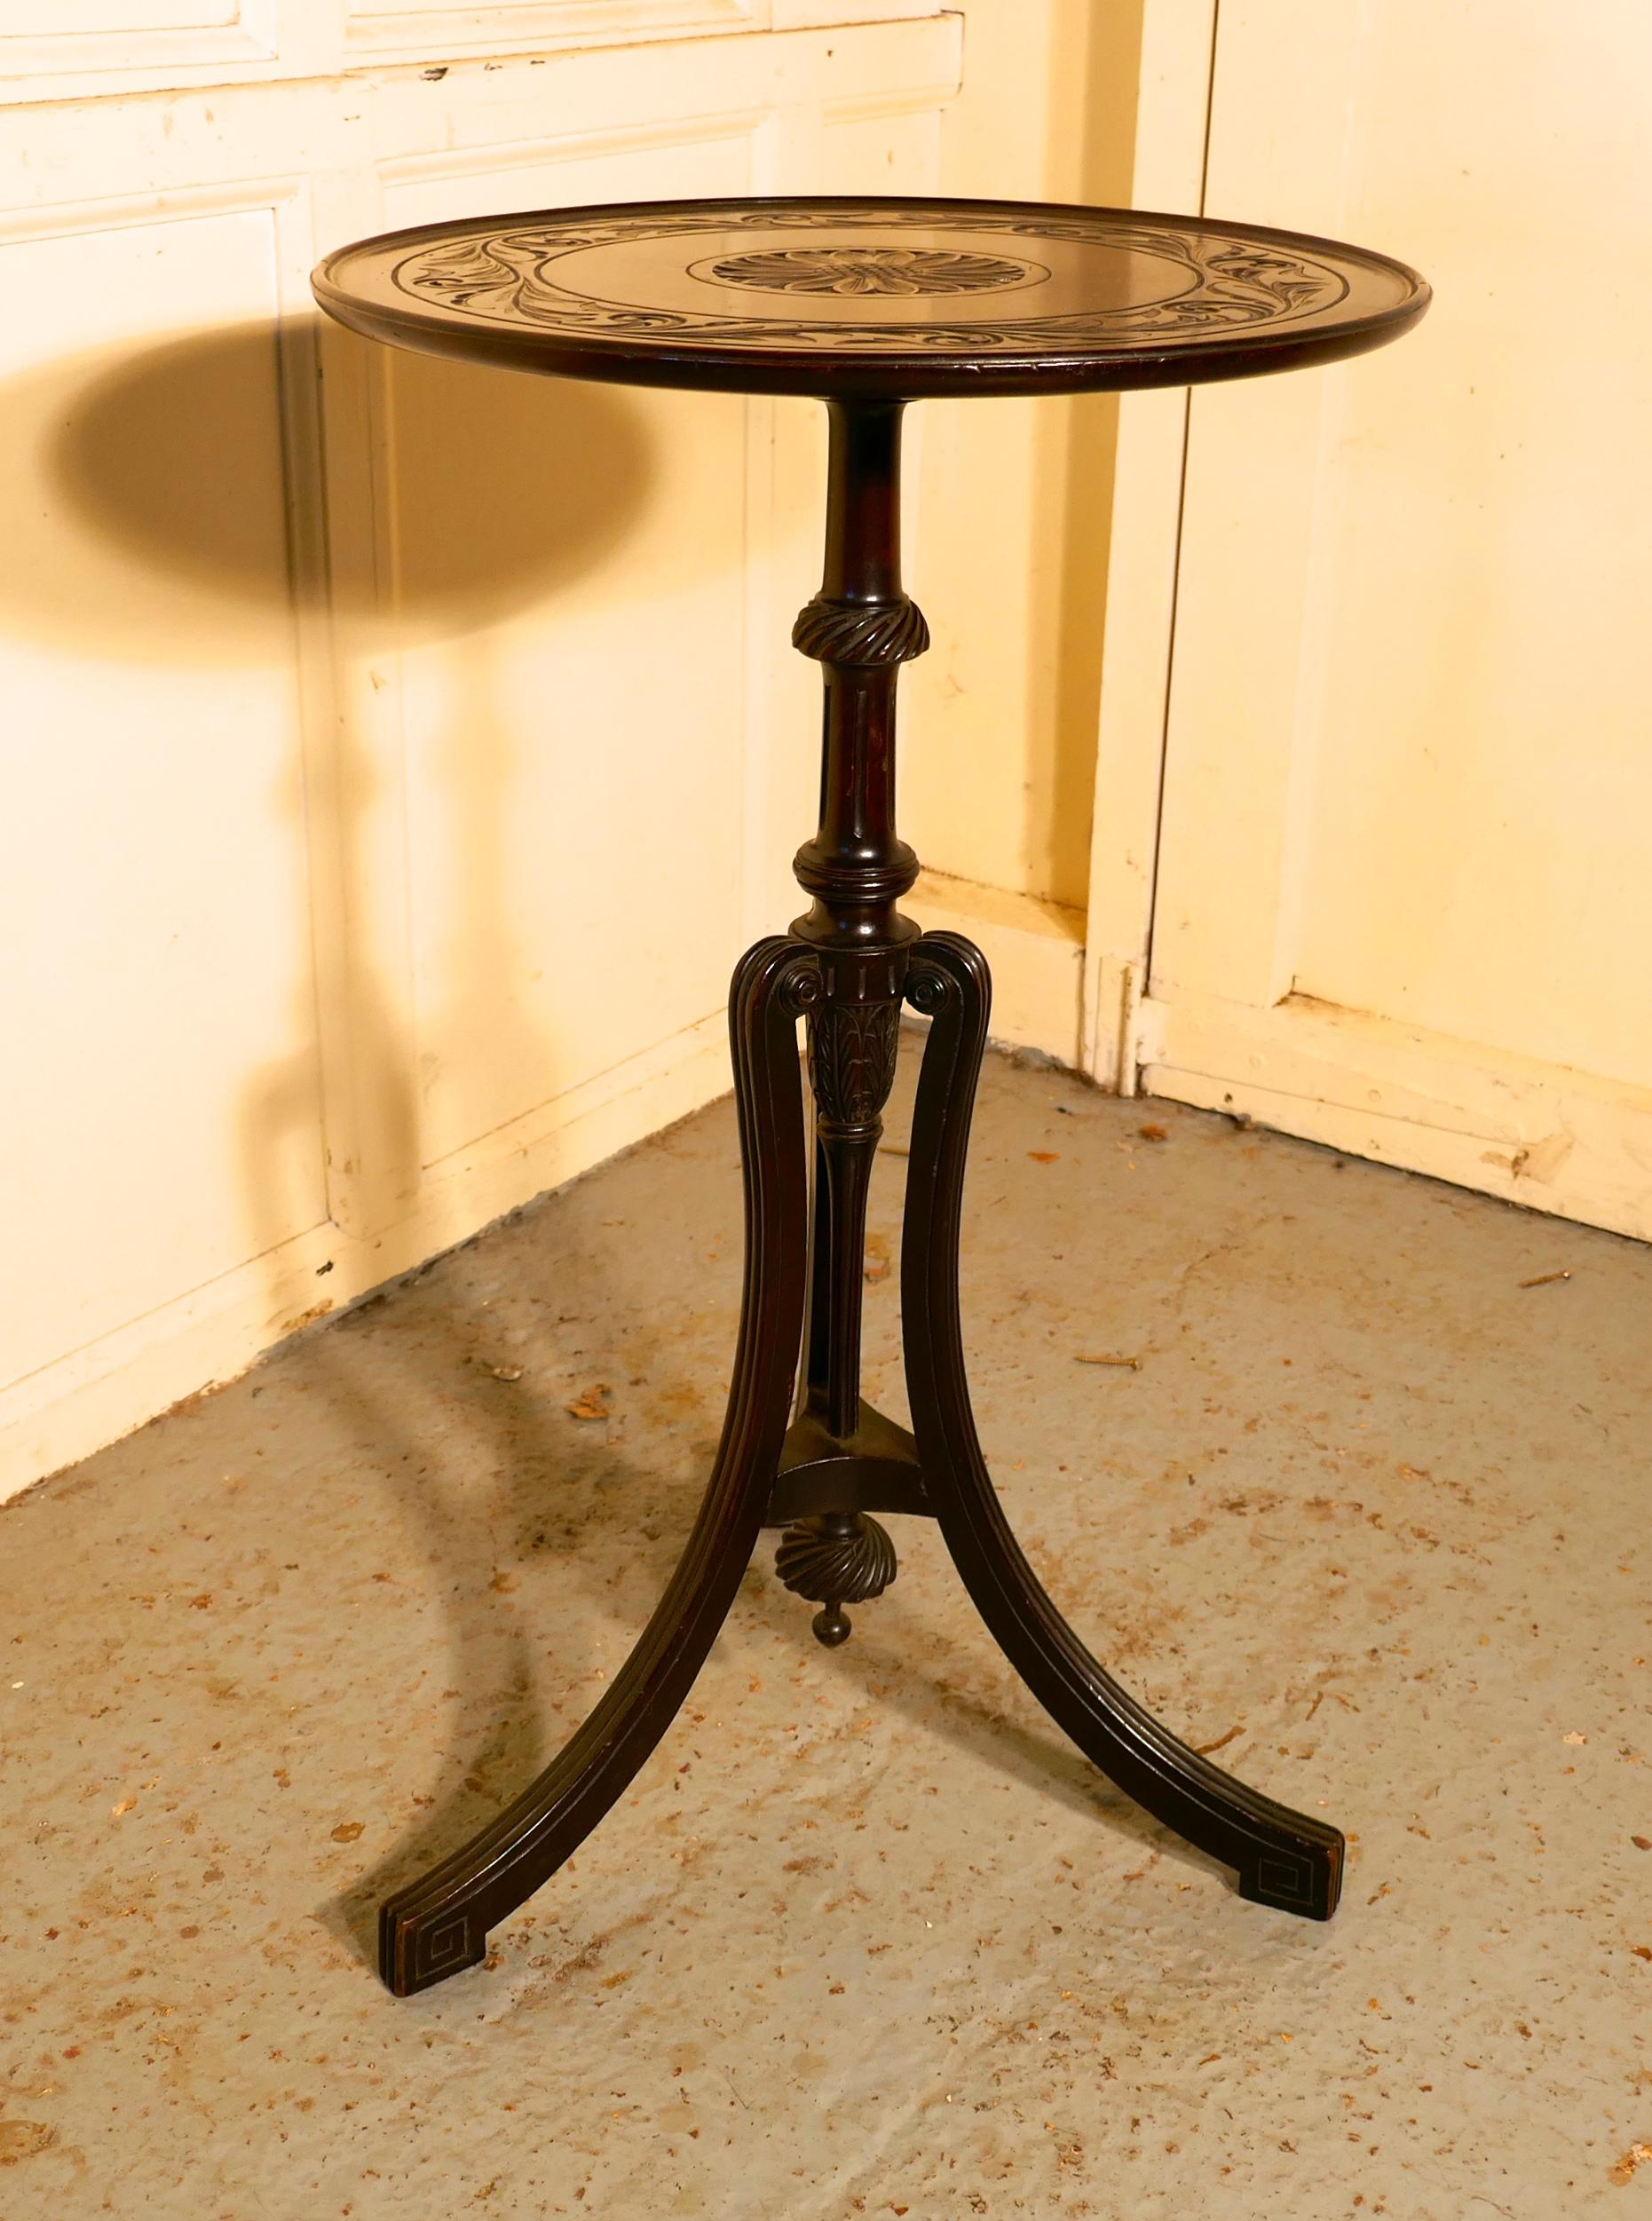 Decorative 2 tone Art Nouveau Wine Table by Bulstrode of Cambridge

This lovely table stands on a very unusual three footed base it has an exquisitely turned centre column with the reeded splayed legs scrolling out from quite a high point
The round